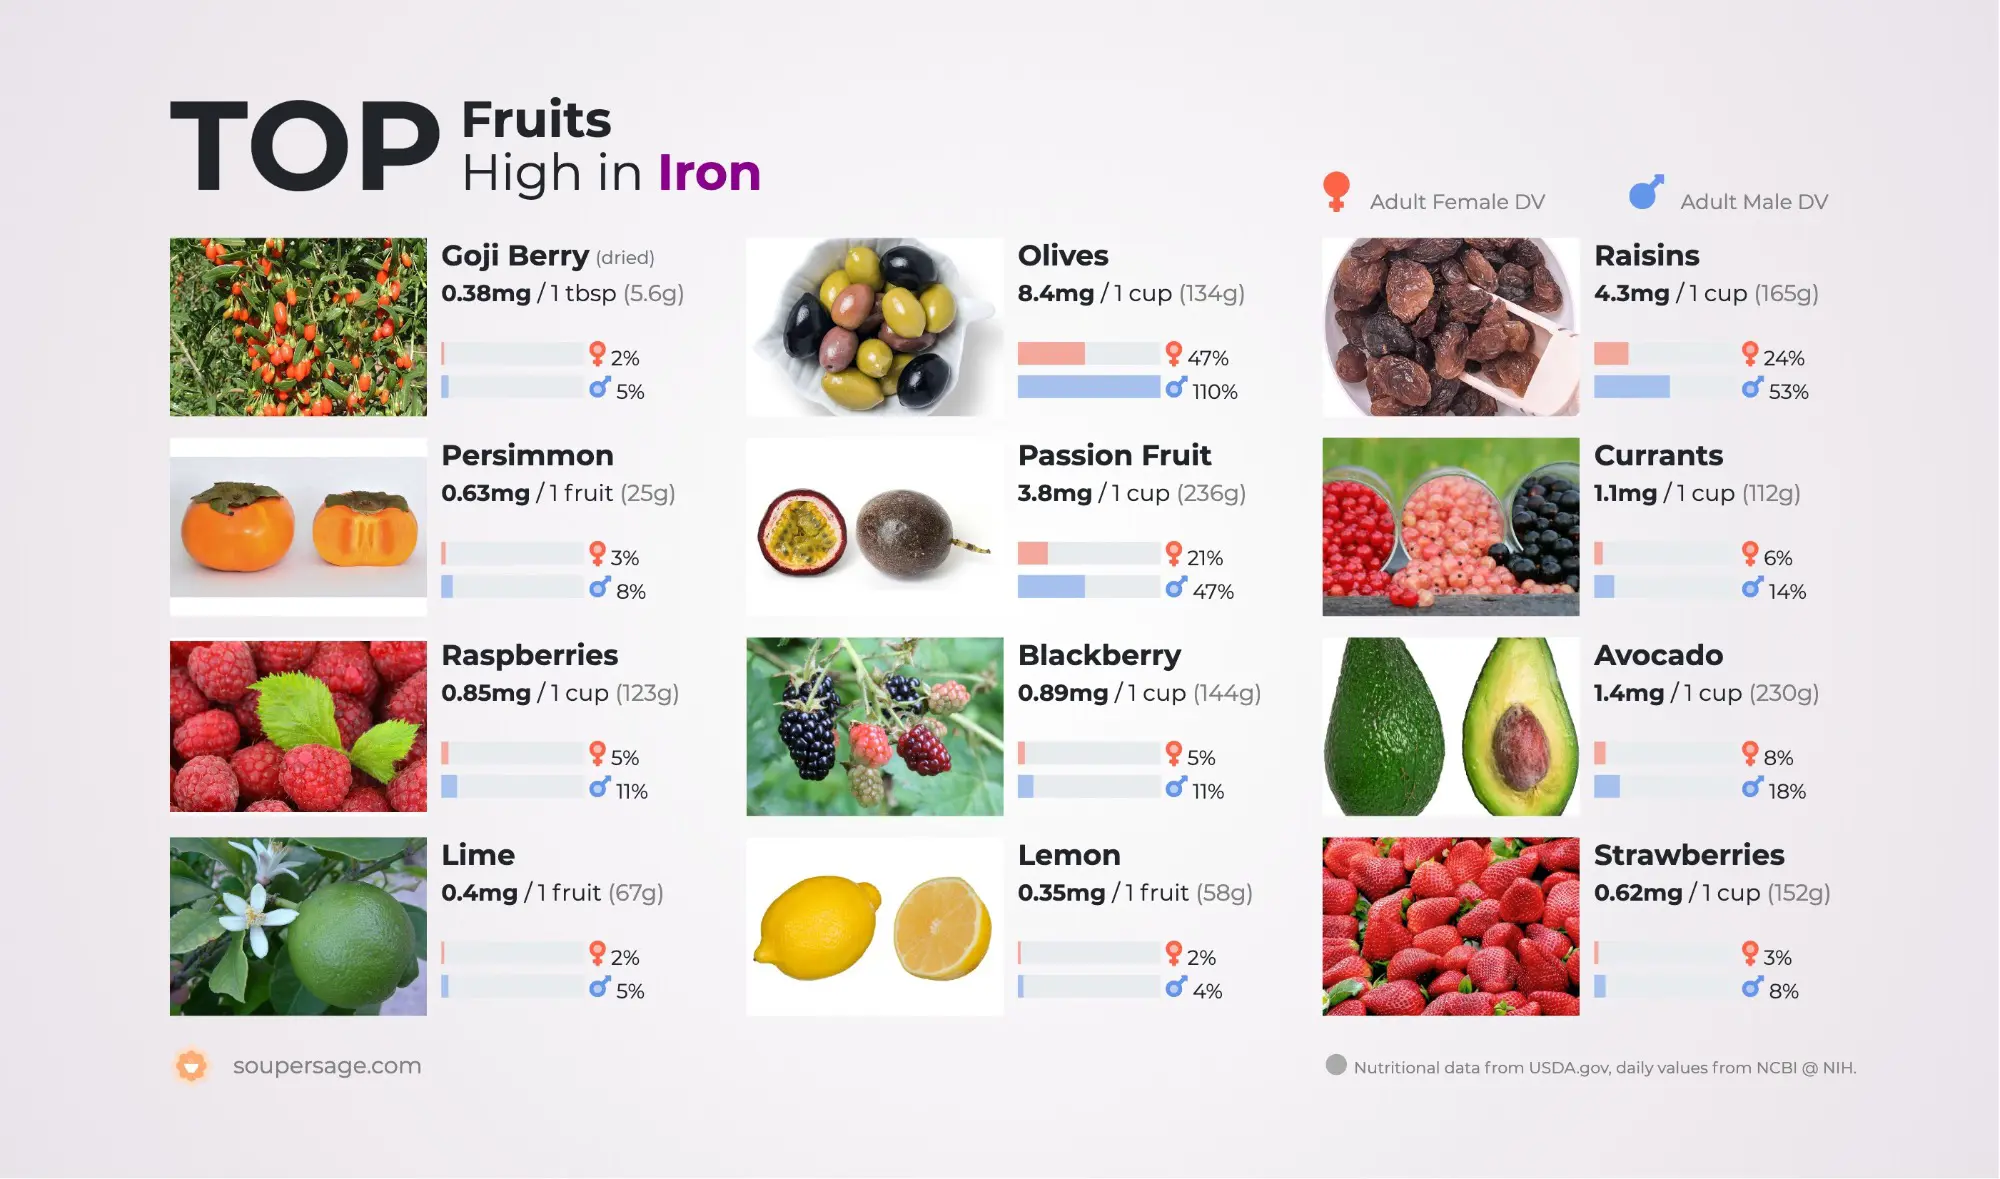 Top Fruits High in Iron